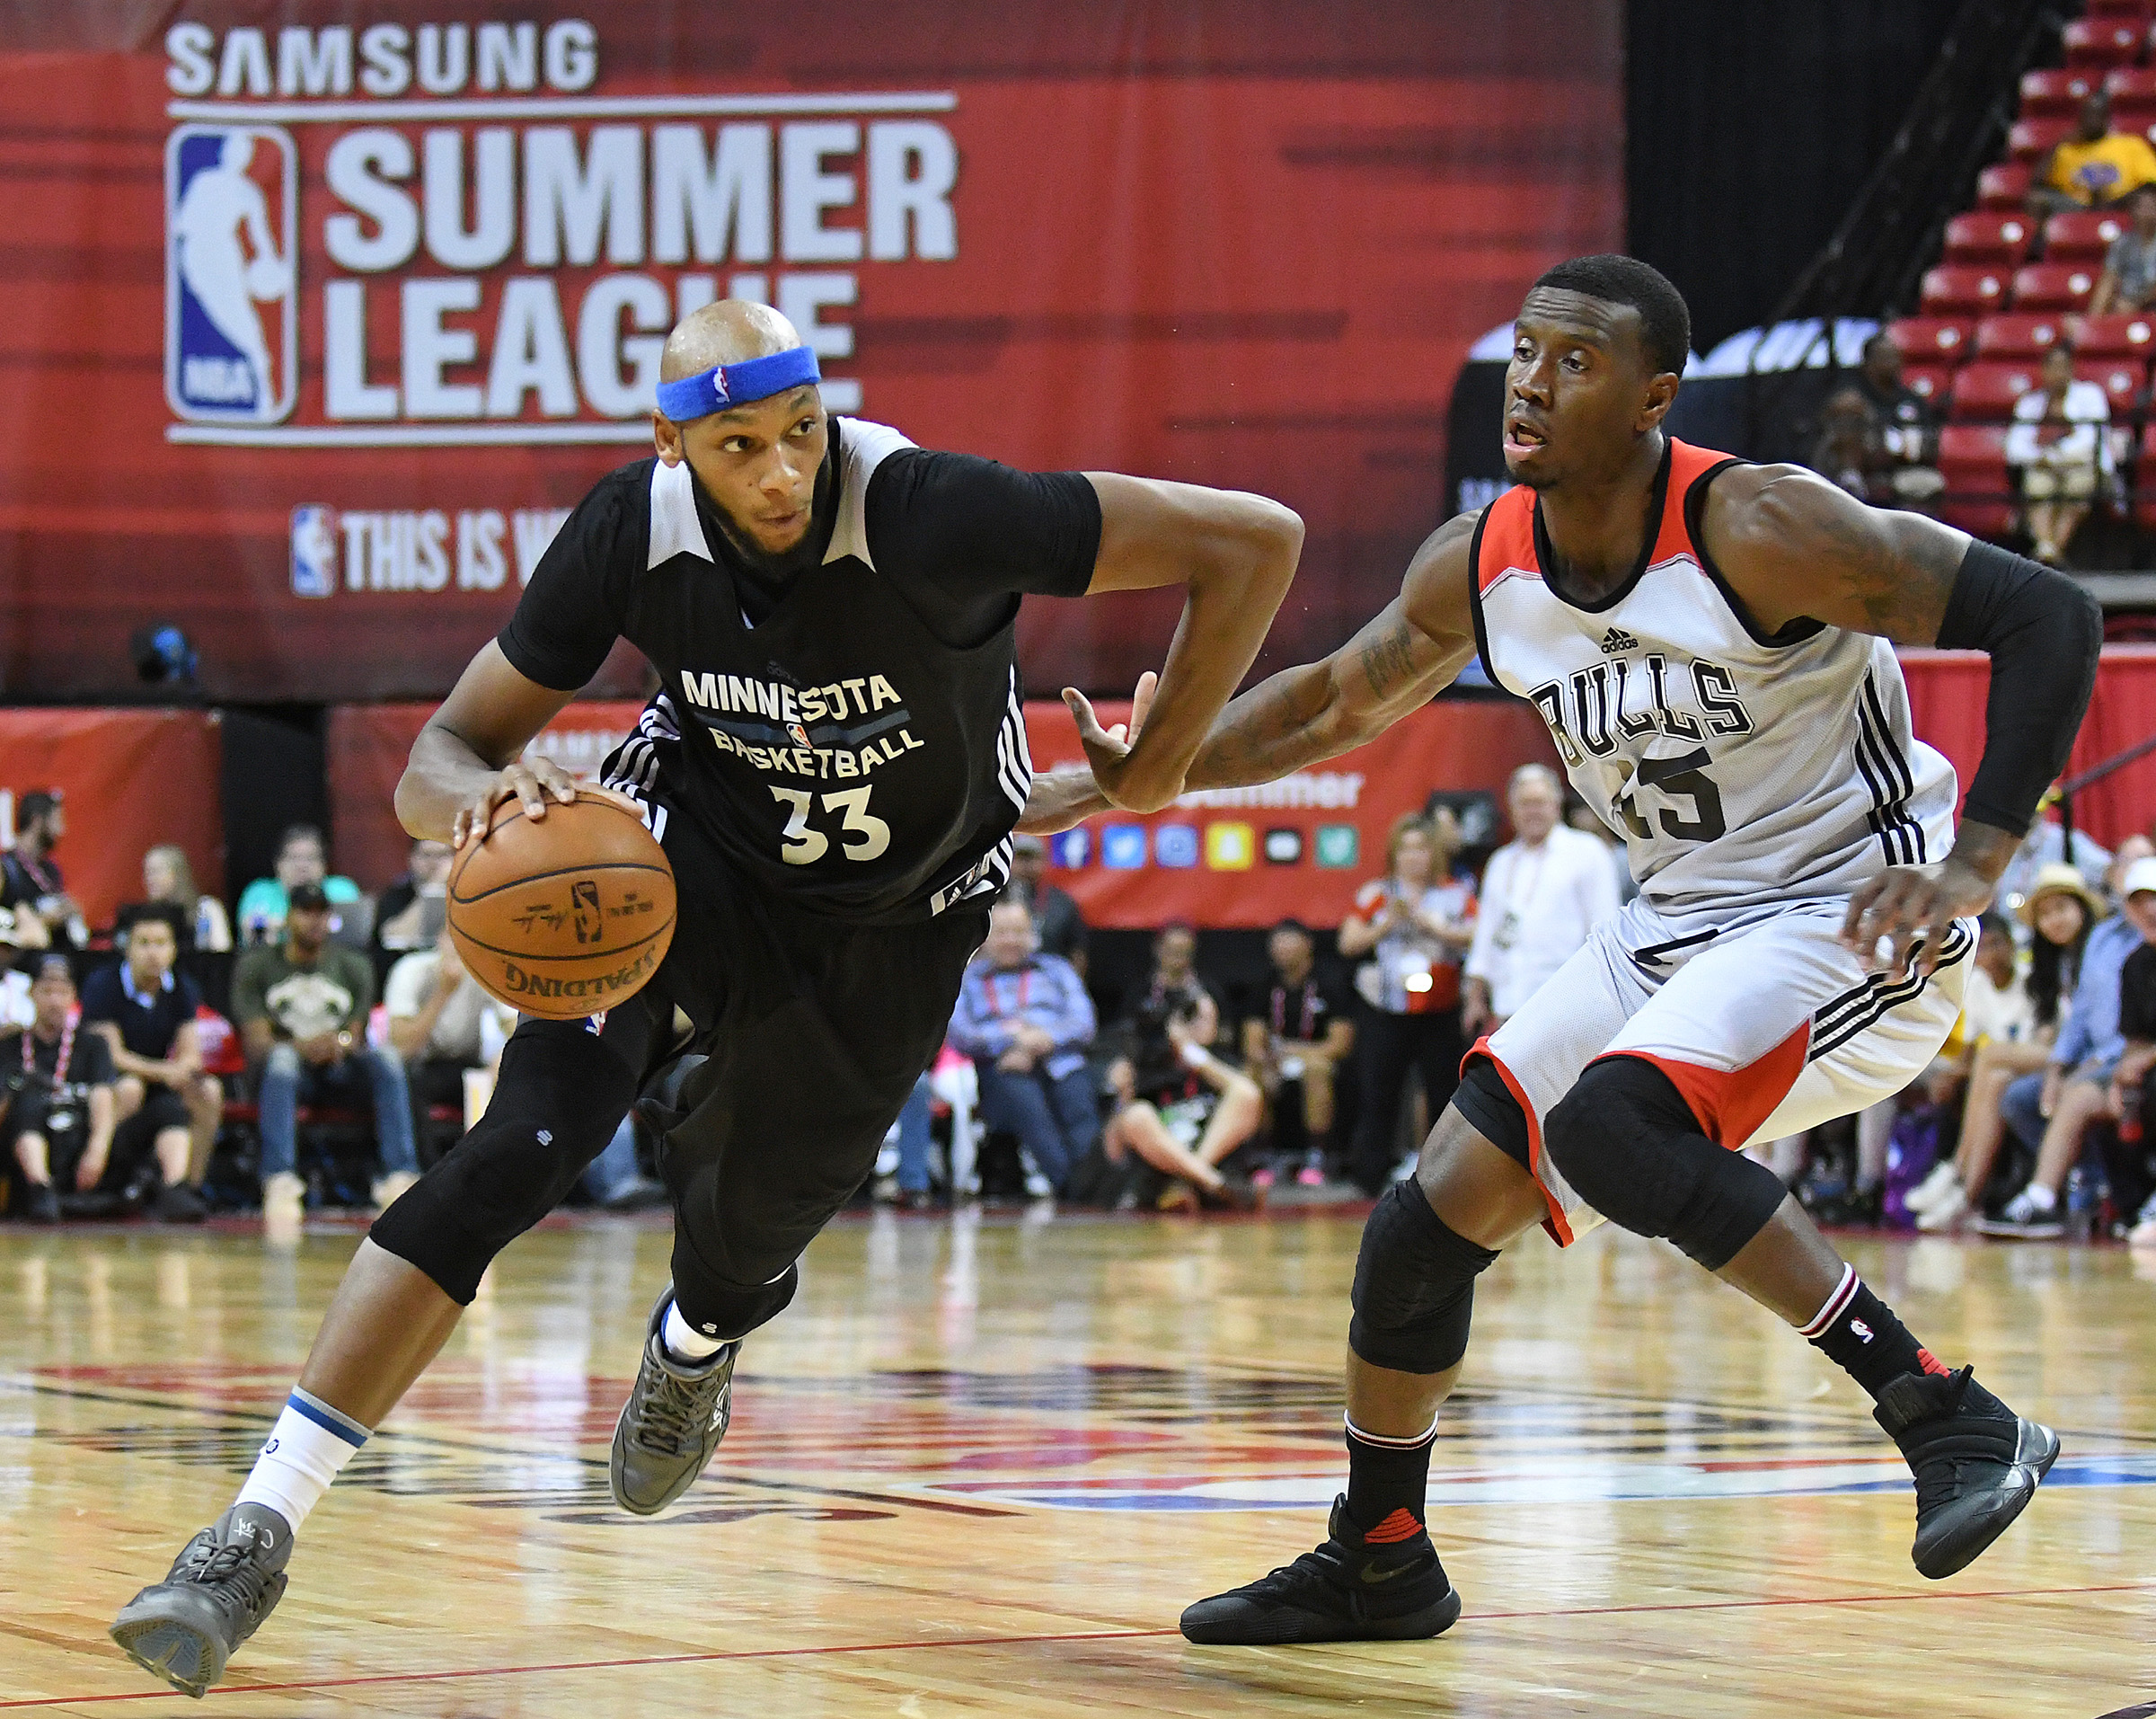 Nba Summer League Jerseys Kings Hold MiniCamp Prior to 2015 NBA